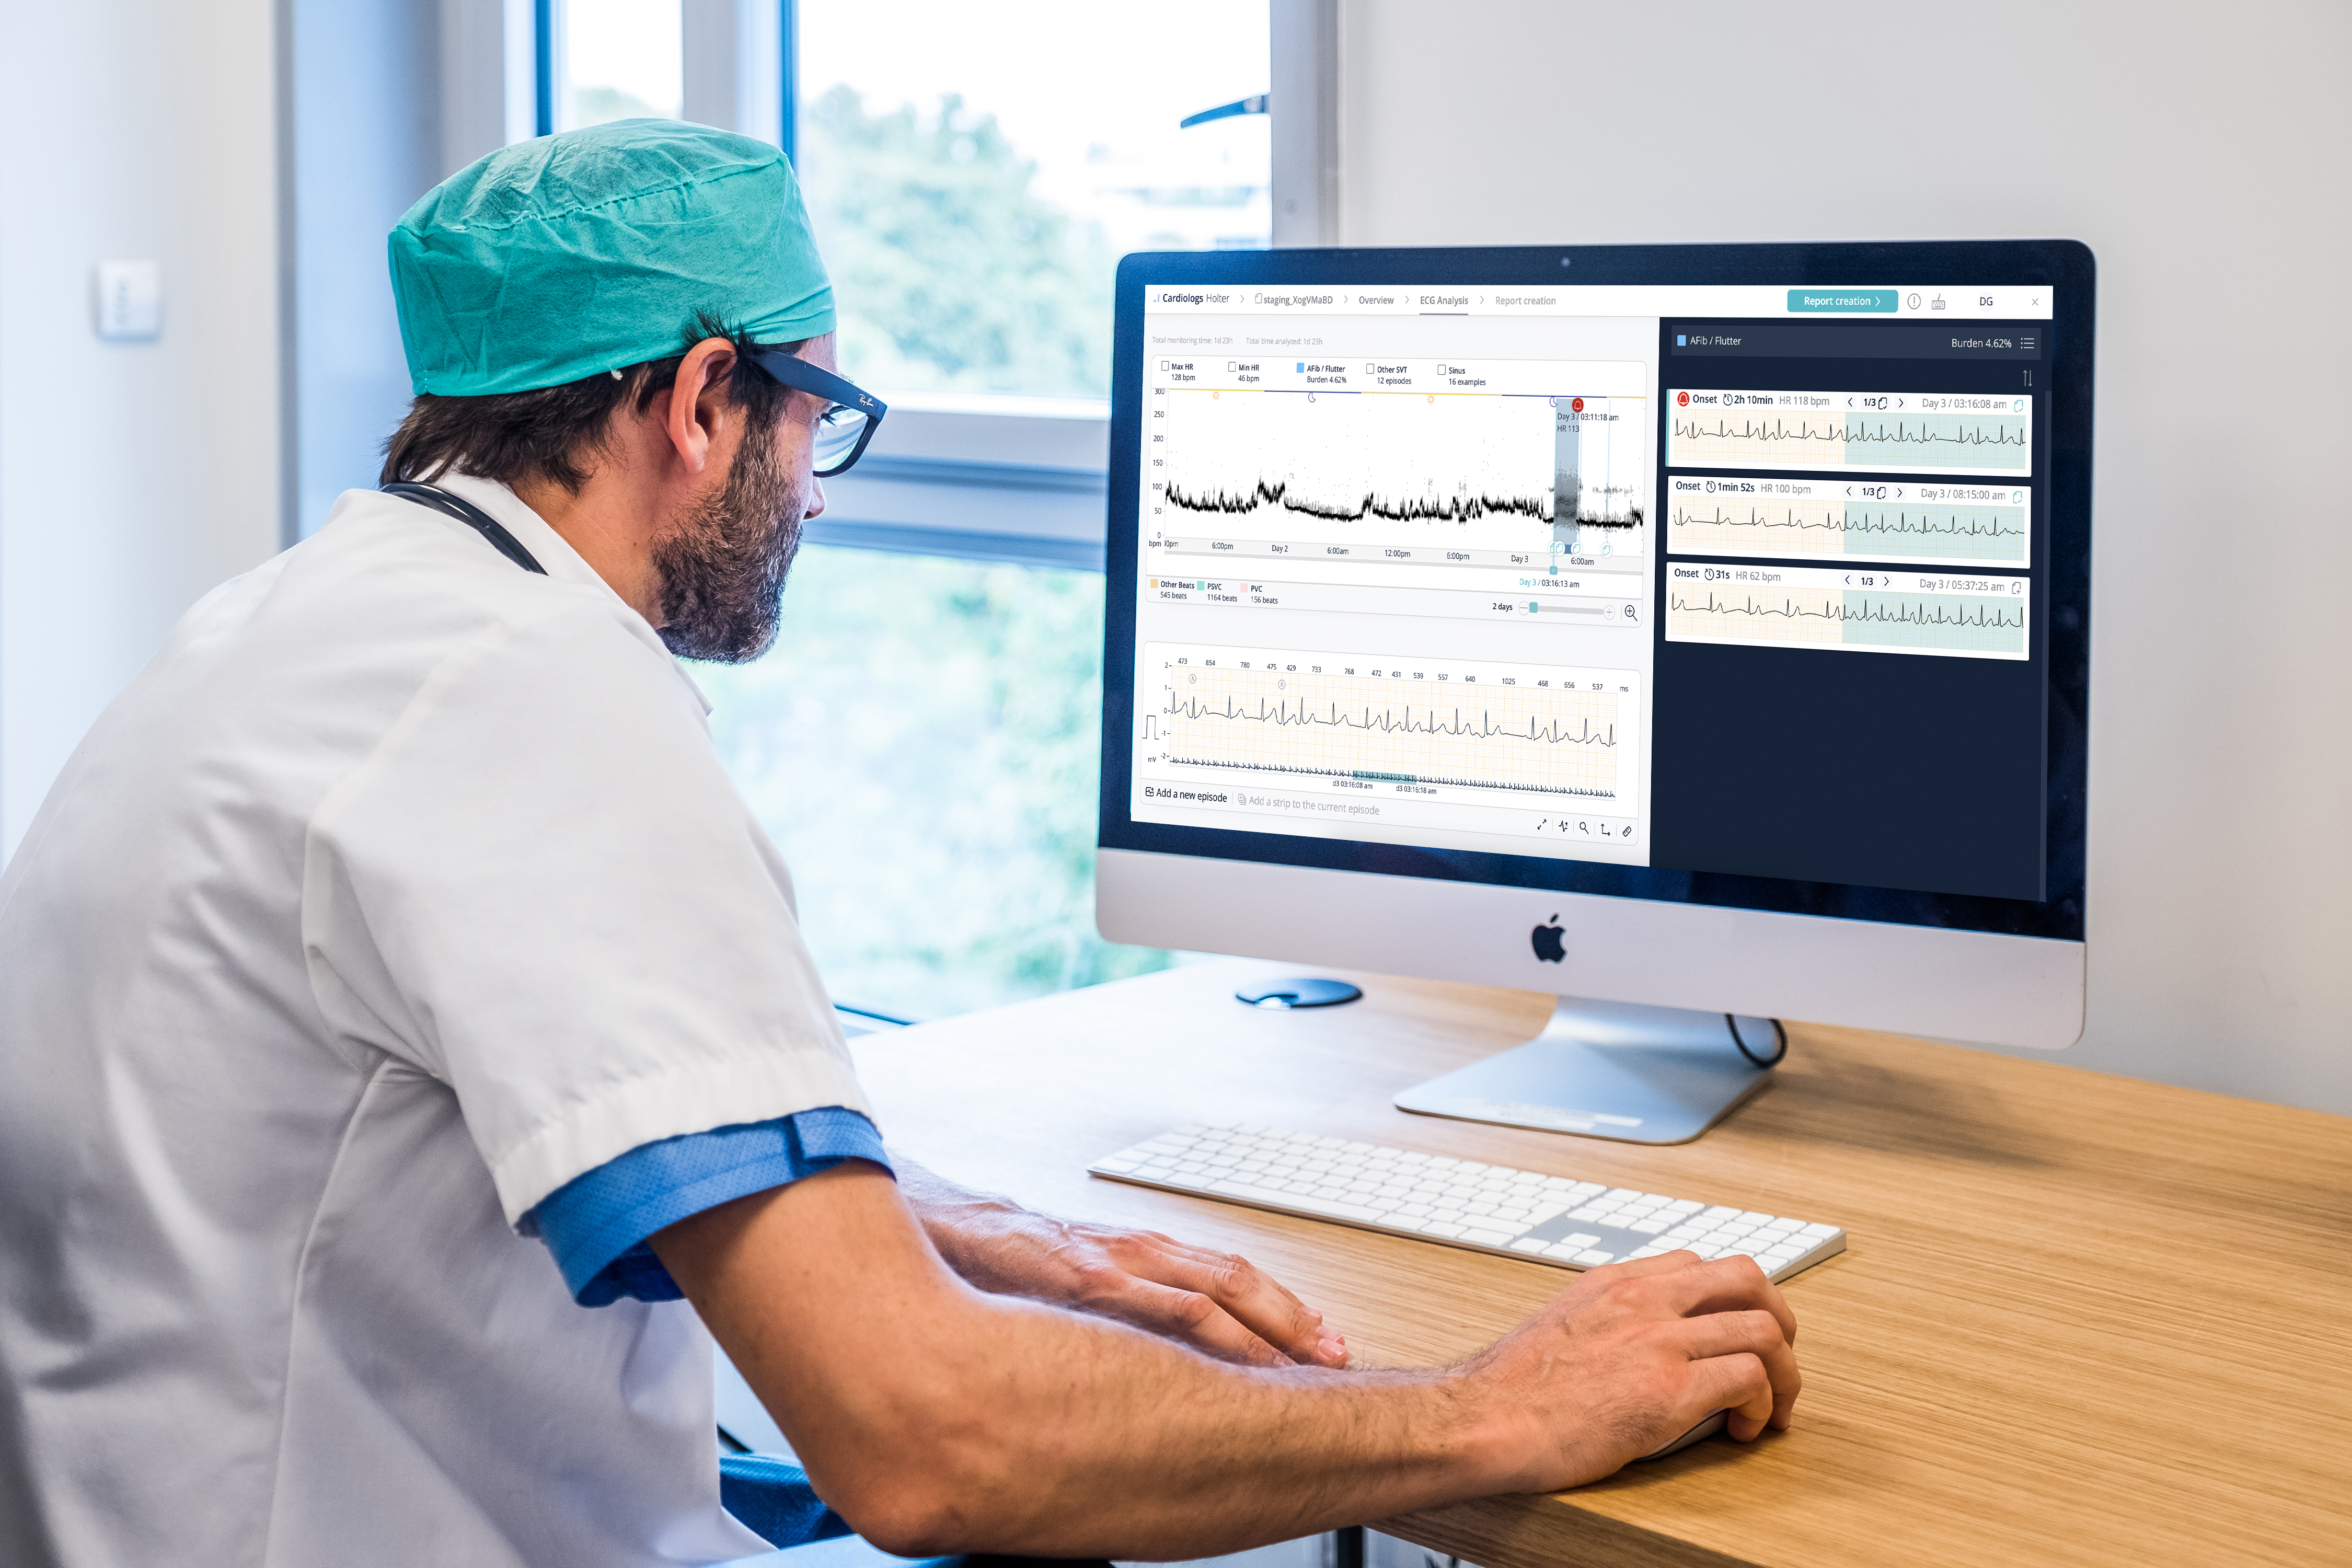 A cardiologist reviews an ECG readout report with AI-assisted analysis